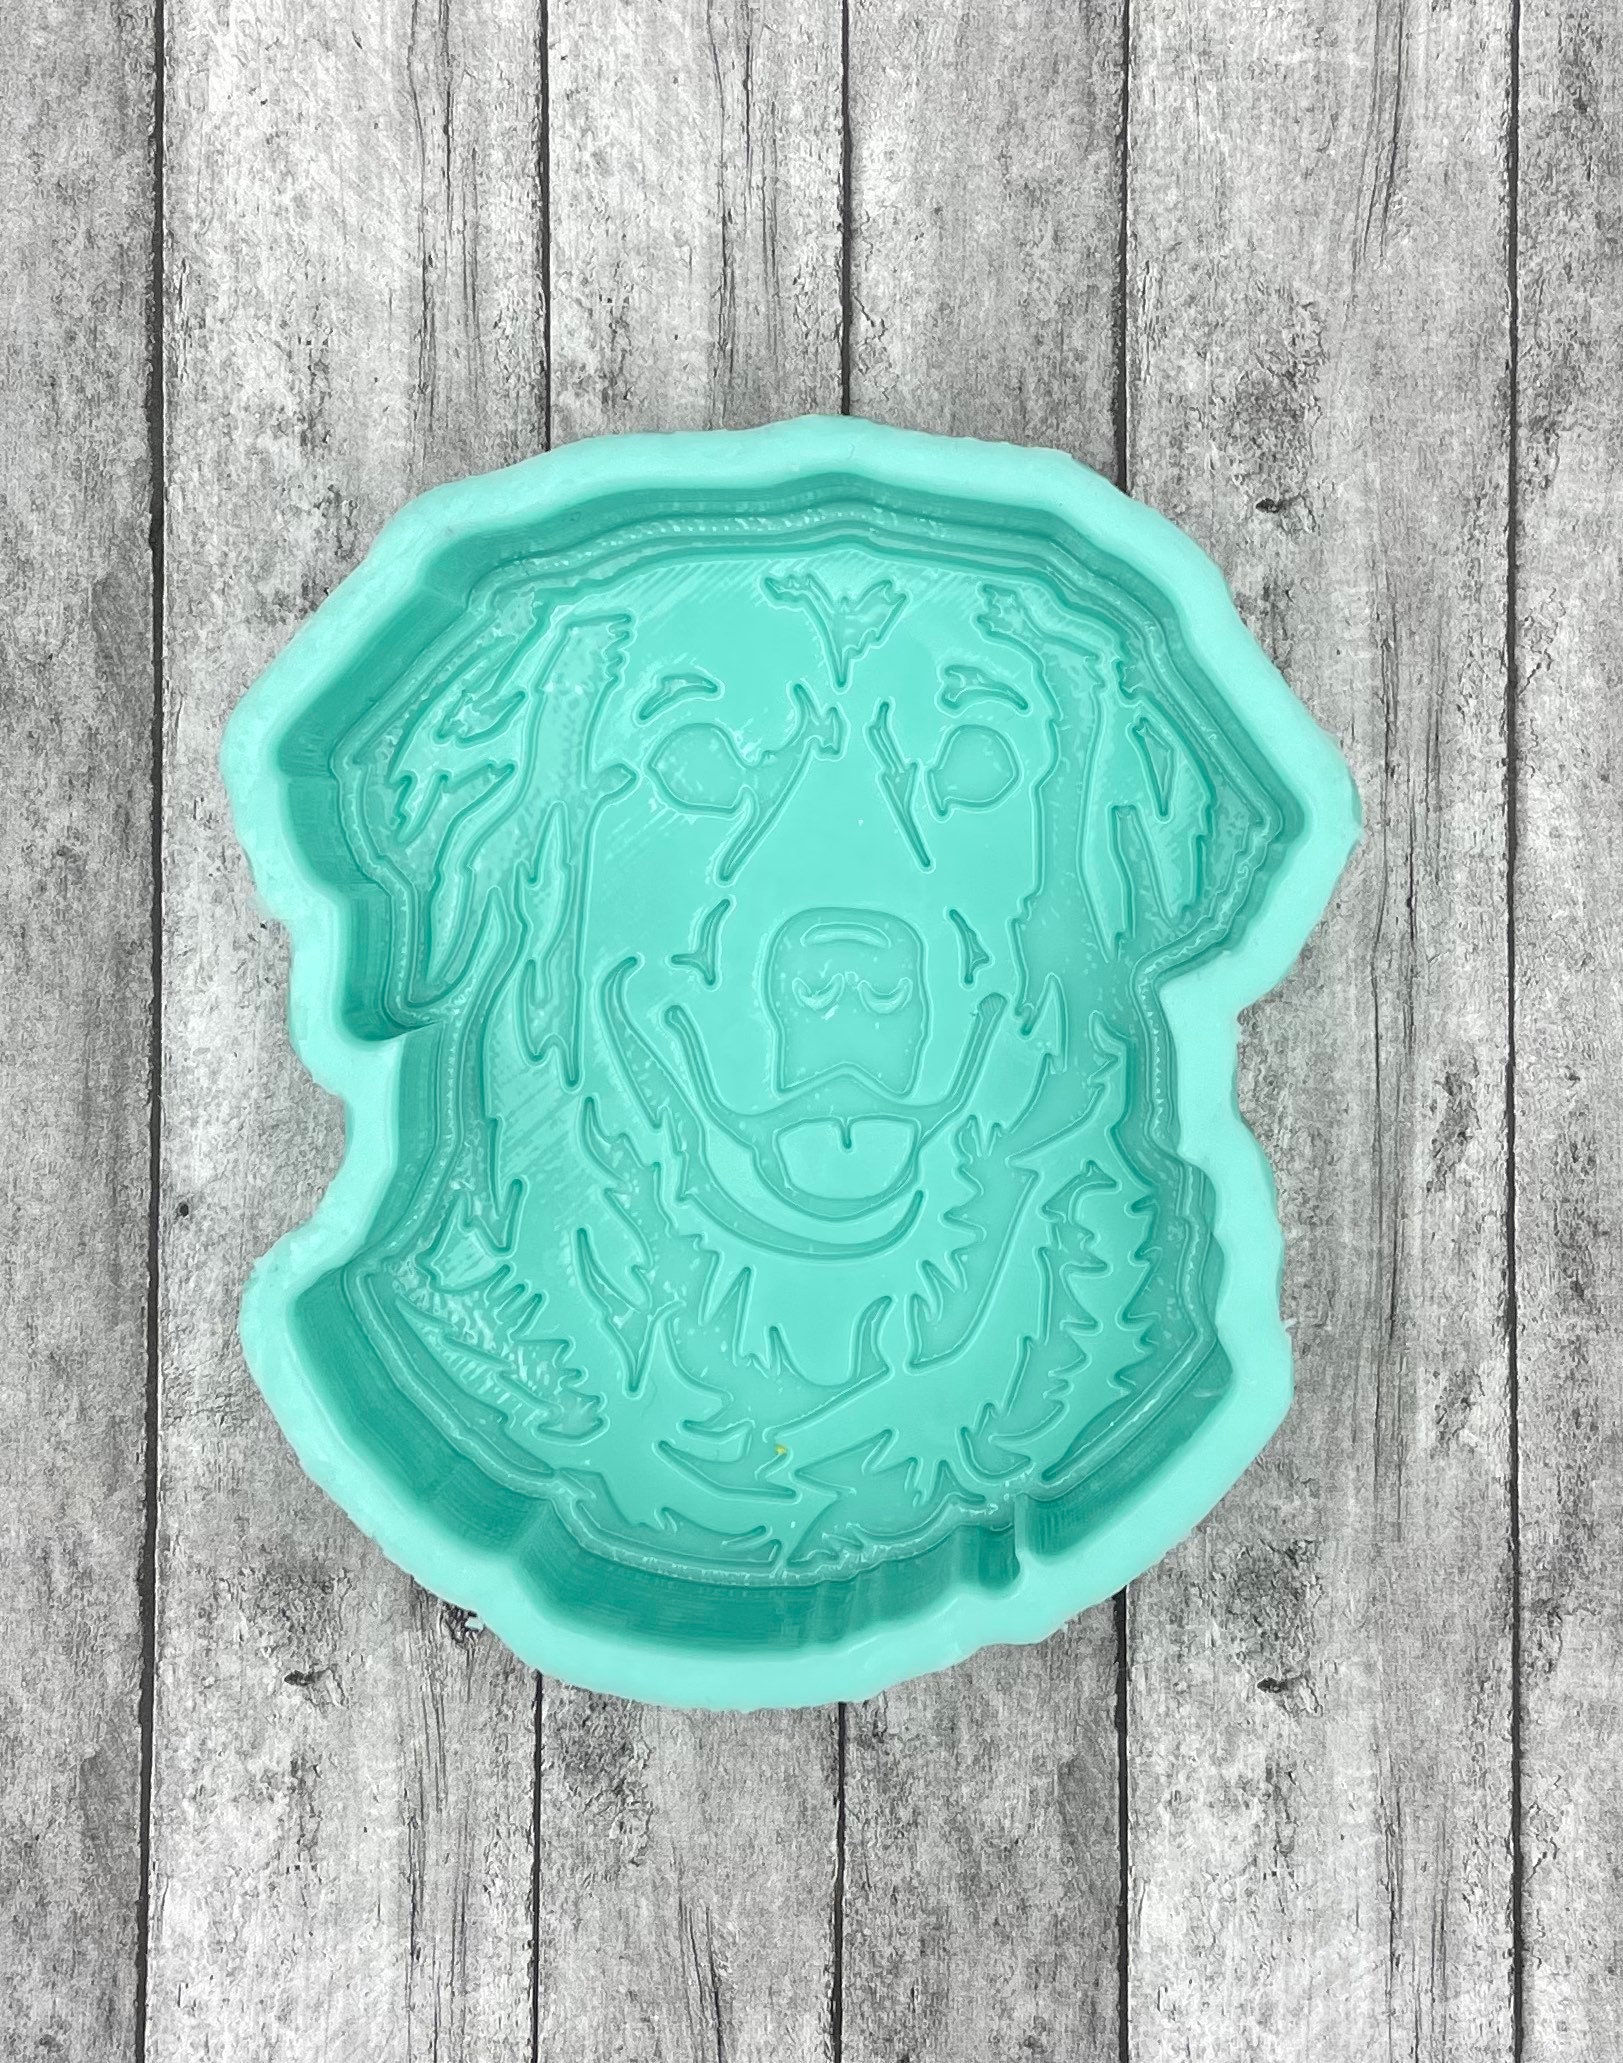 Dog - Poodle - Silicone Mold – Glitters Matter®